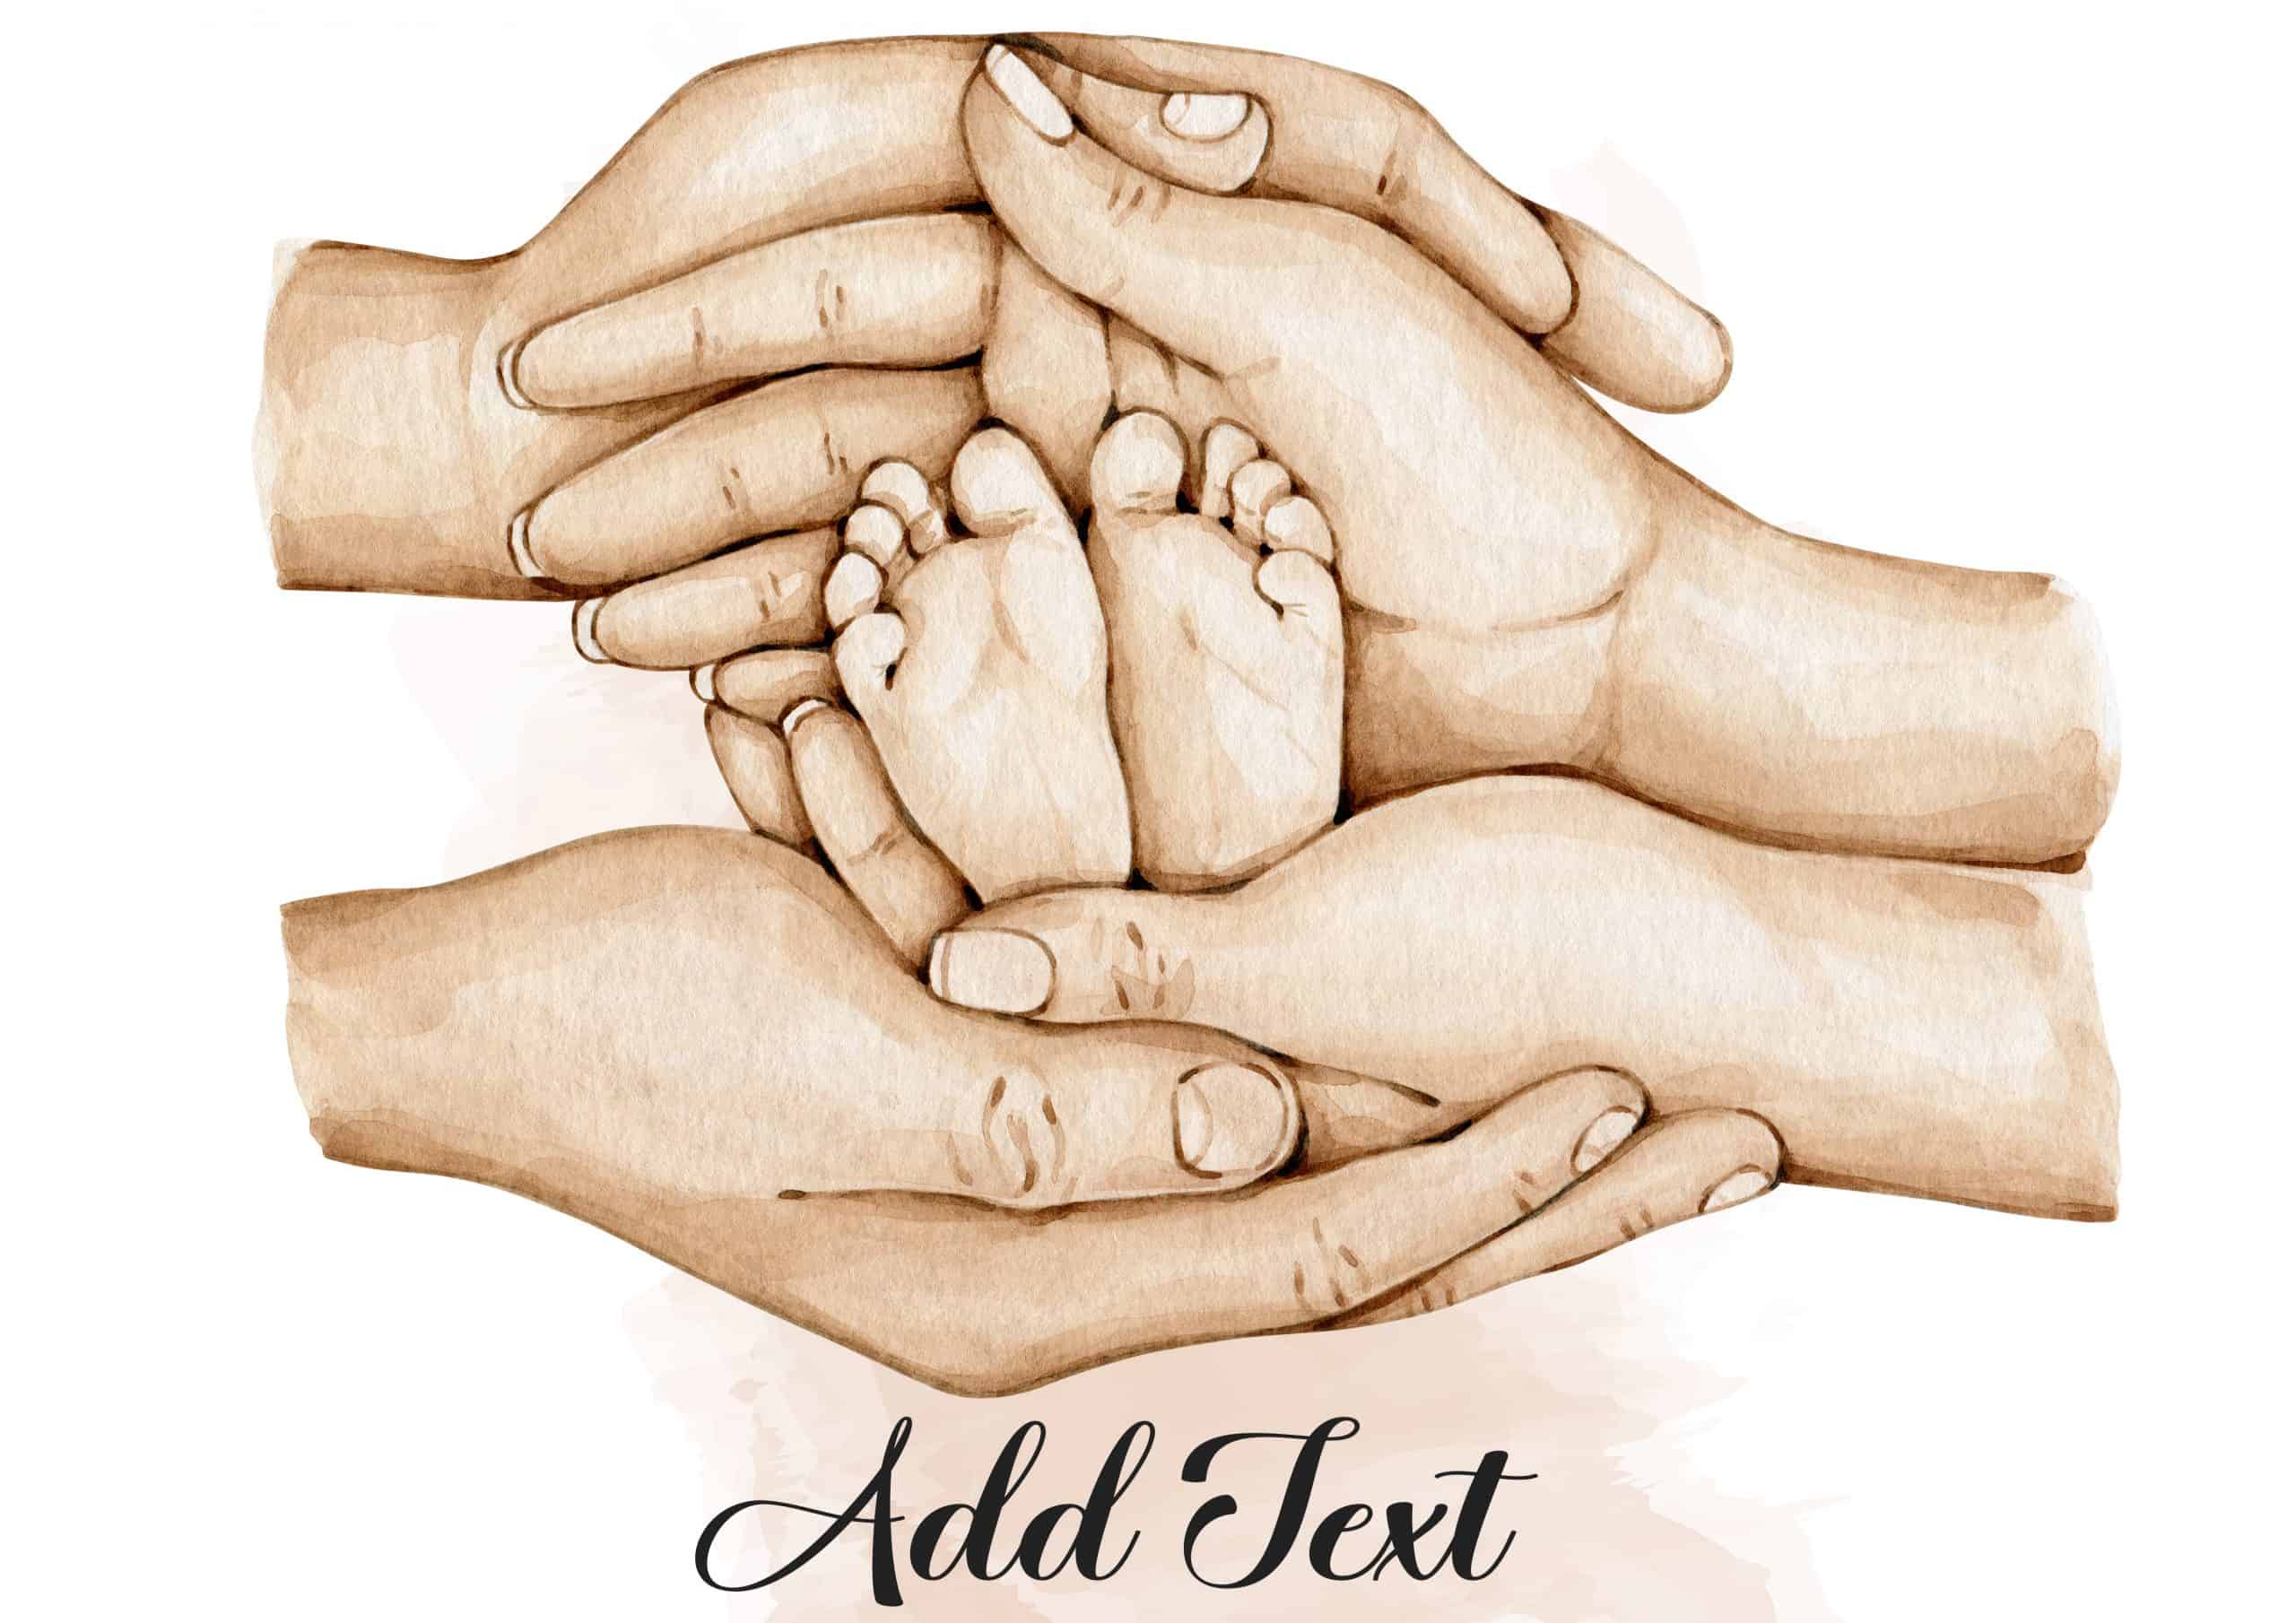 Image of baby foot design Royalty Free Vector Image